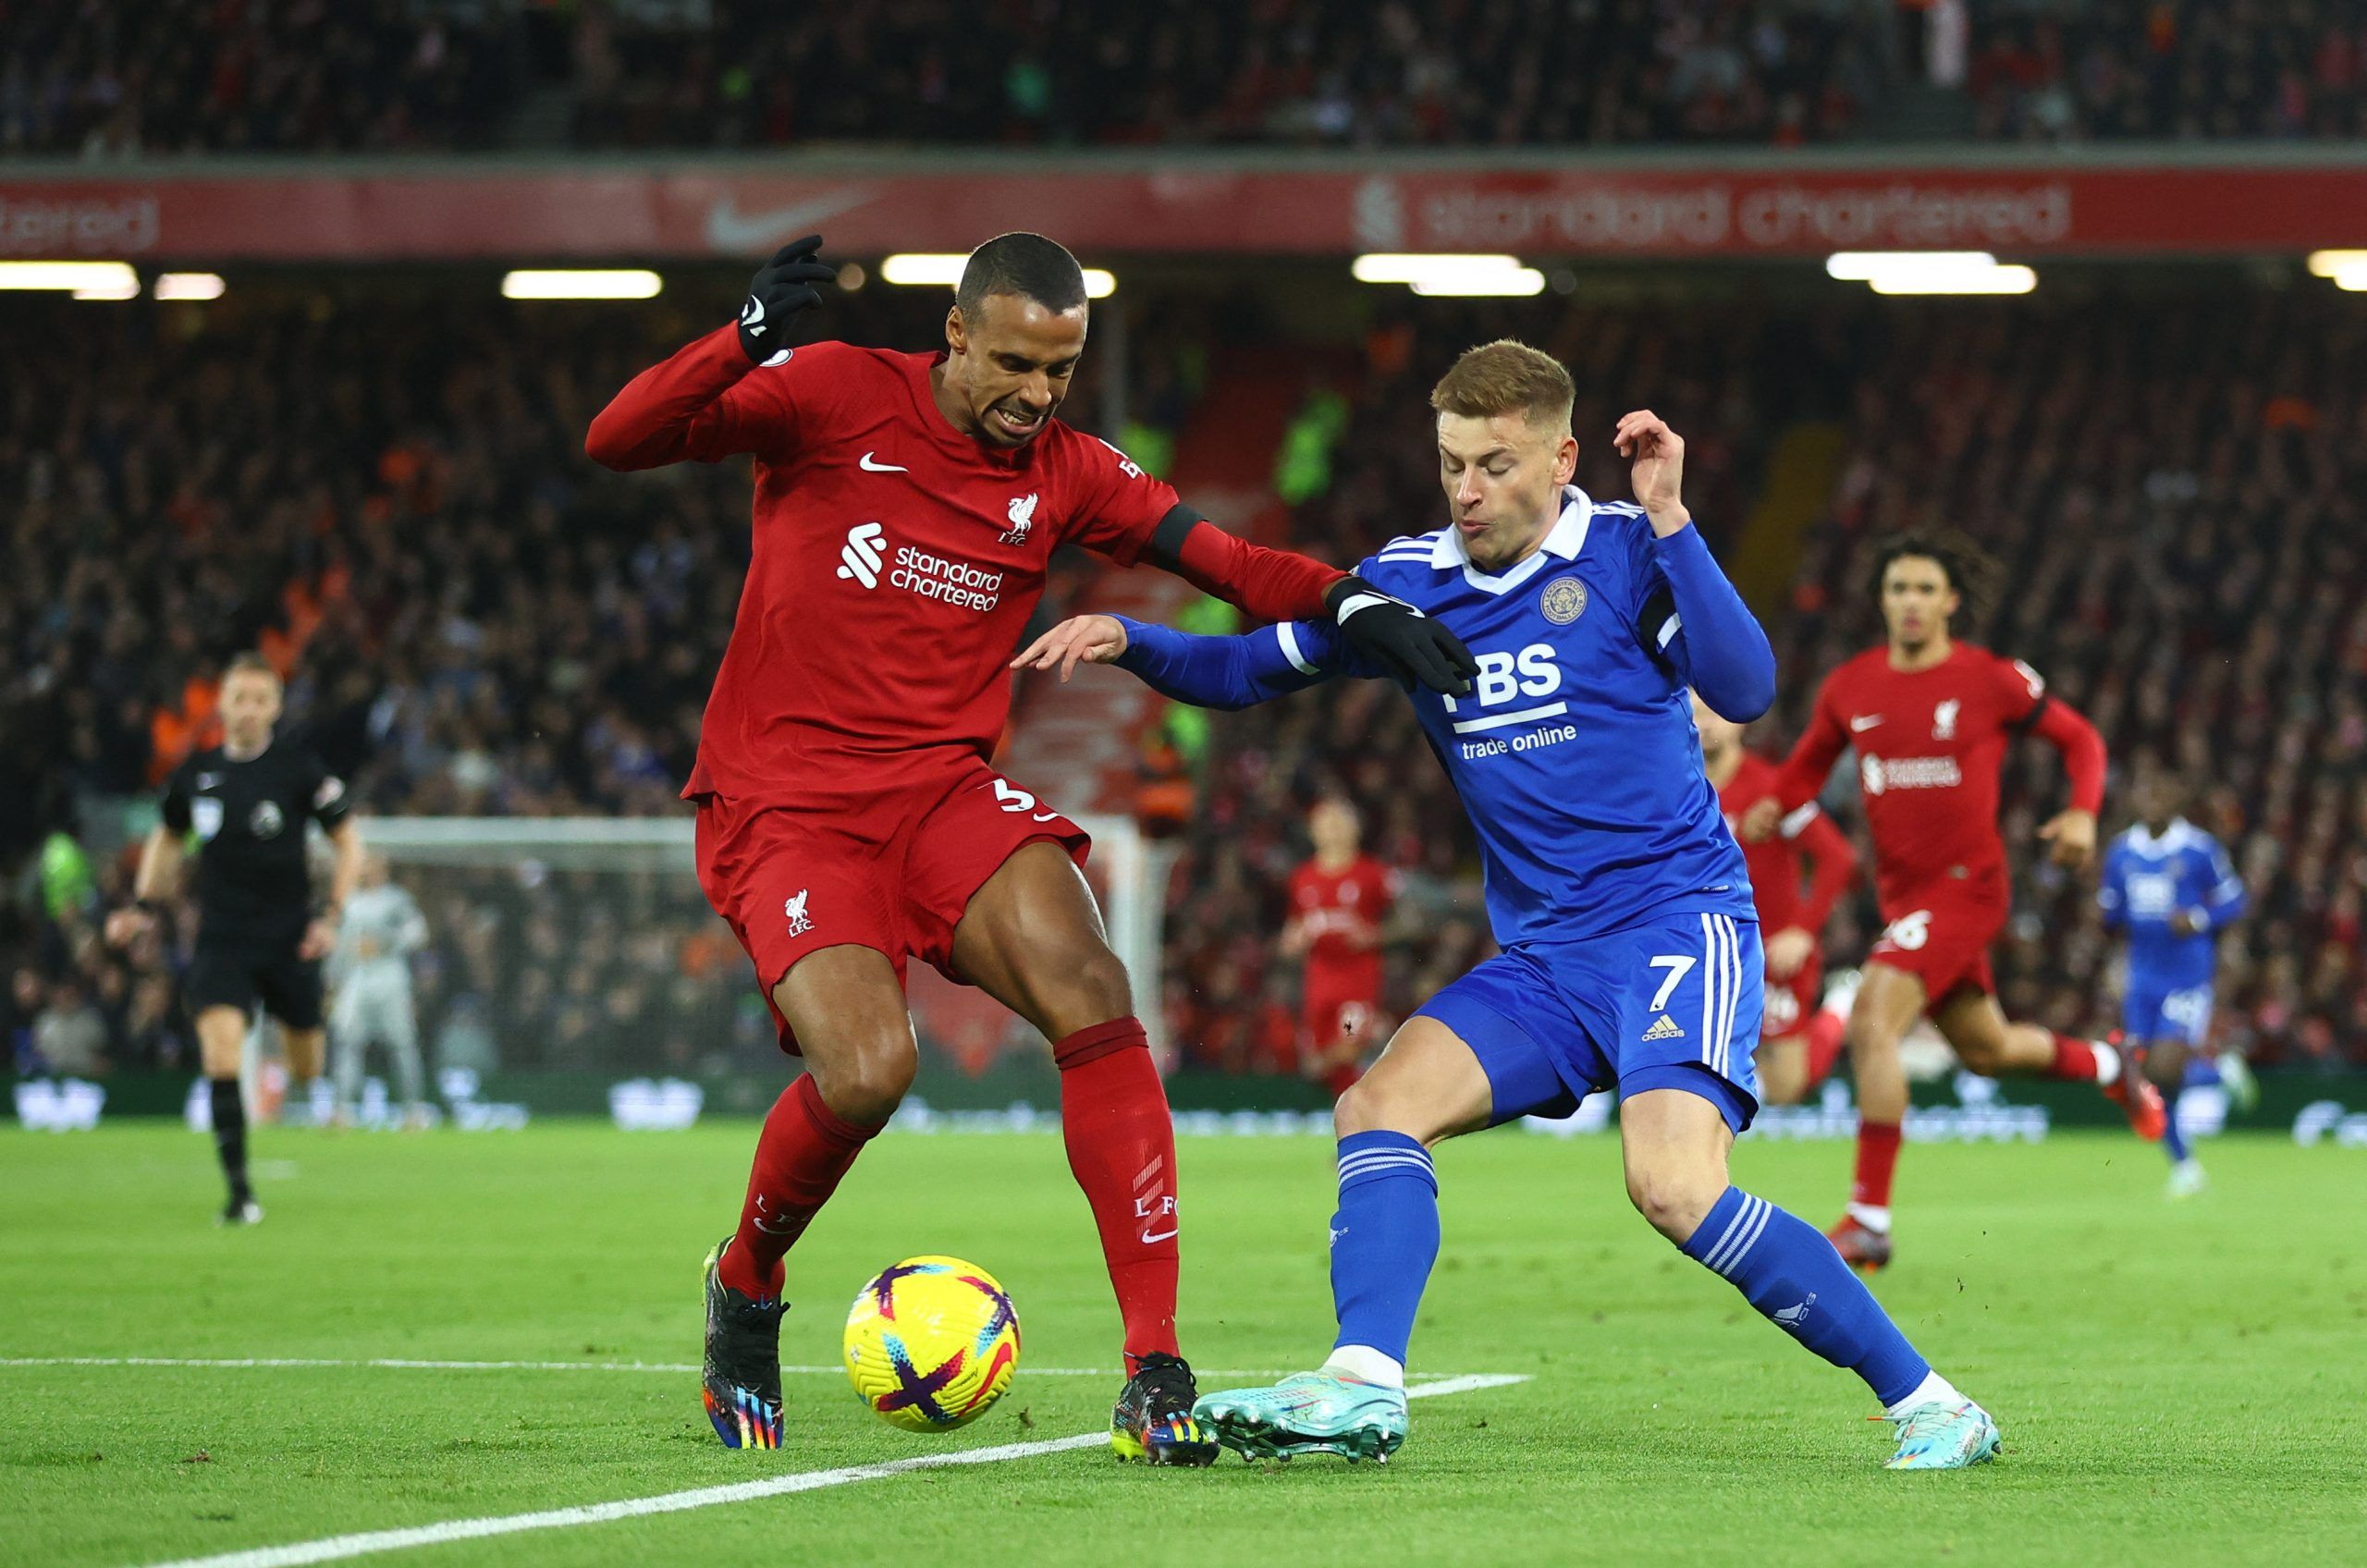 Soccer Football - Premier League - Liverpool v Leicester City - Anfield, Liverpool, Britain - December 30, 2022 Liverpool's Joel Matip in action with Leicester City's Harvey Barnes REUTERS/Carl Recine EDITORIAL USE ONLY. No use with unauthorized audio, video, data, fixture lists, club/league logos or 'live' services. Online in-match use limited to 75 images, no video emulation. No use in betting, games or single club /league/player publications.  Please contact your account representative for fu